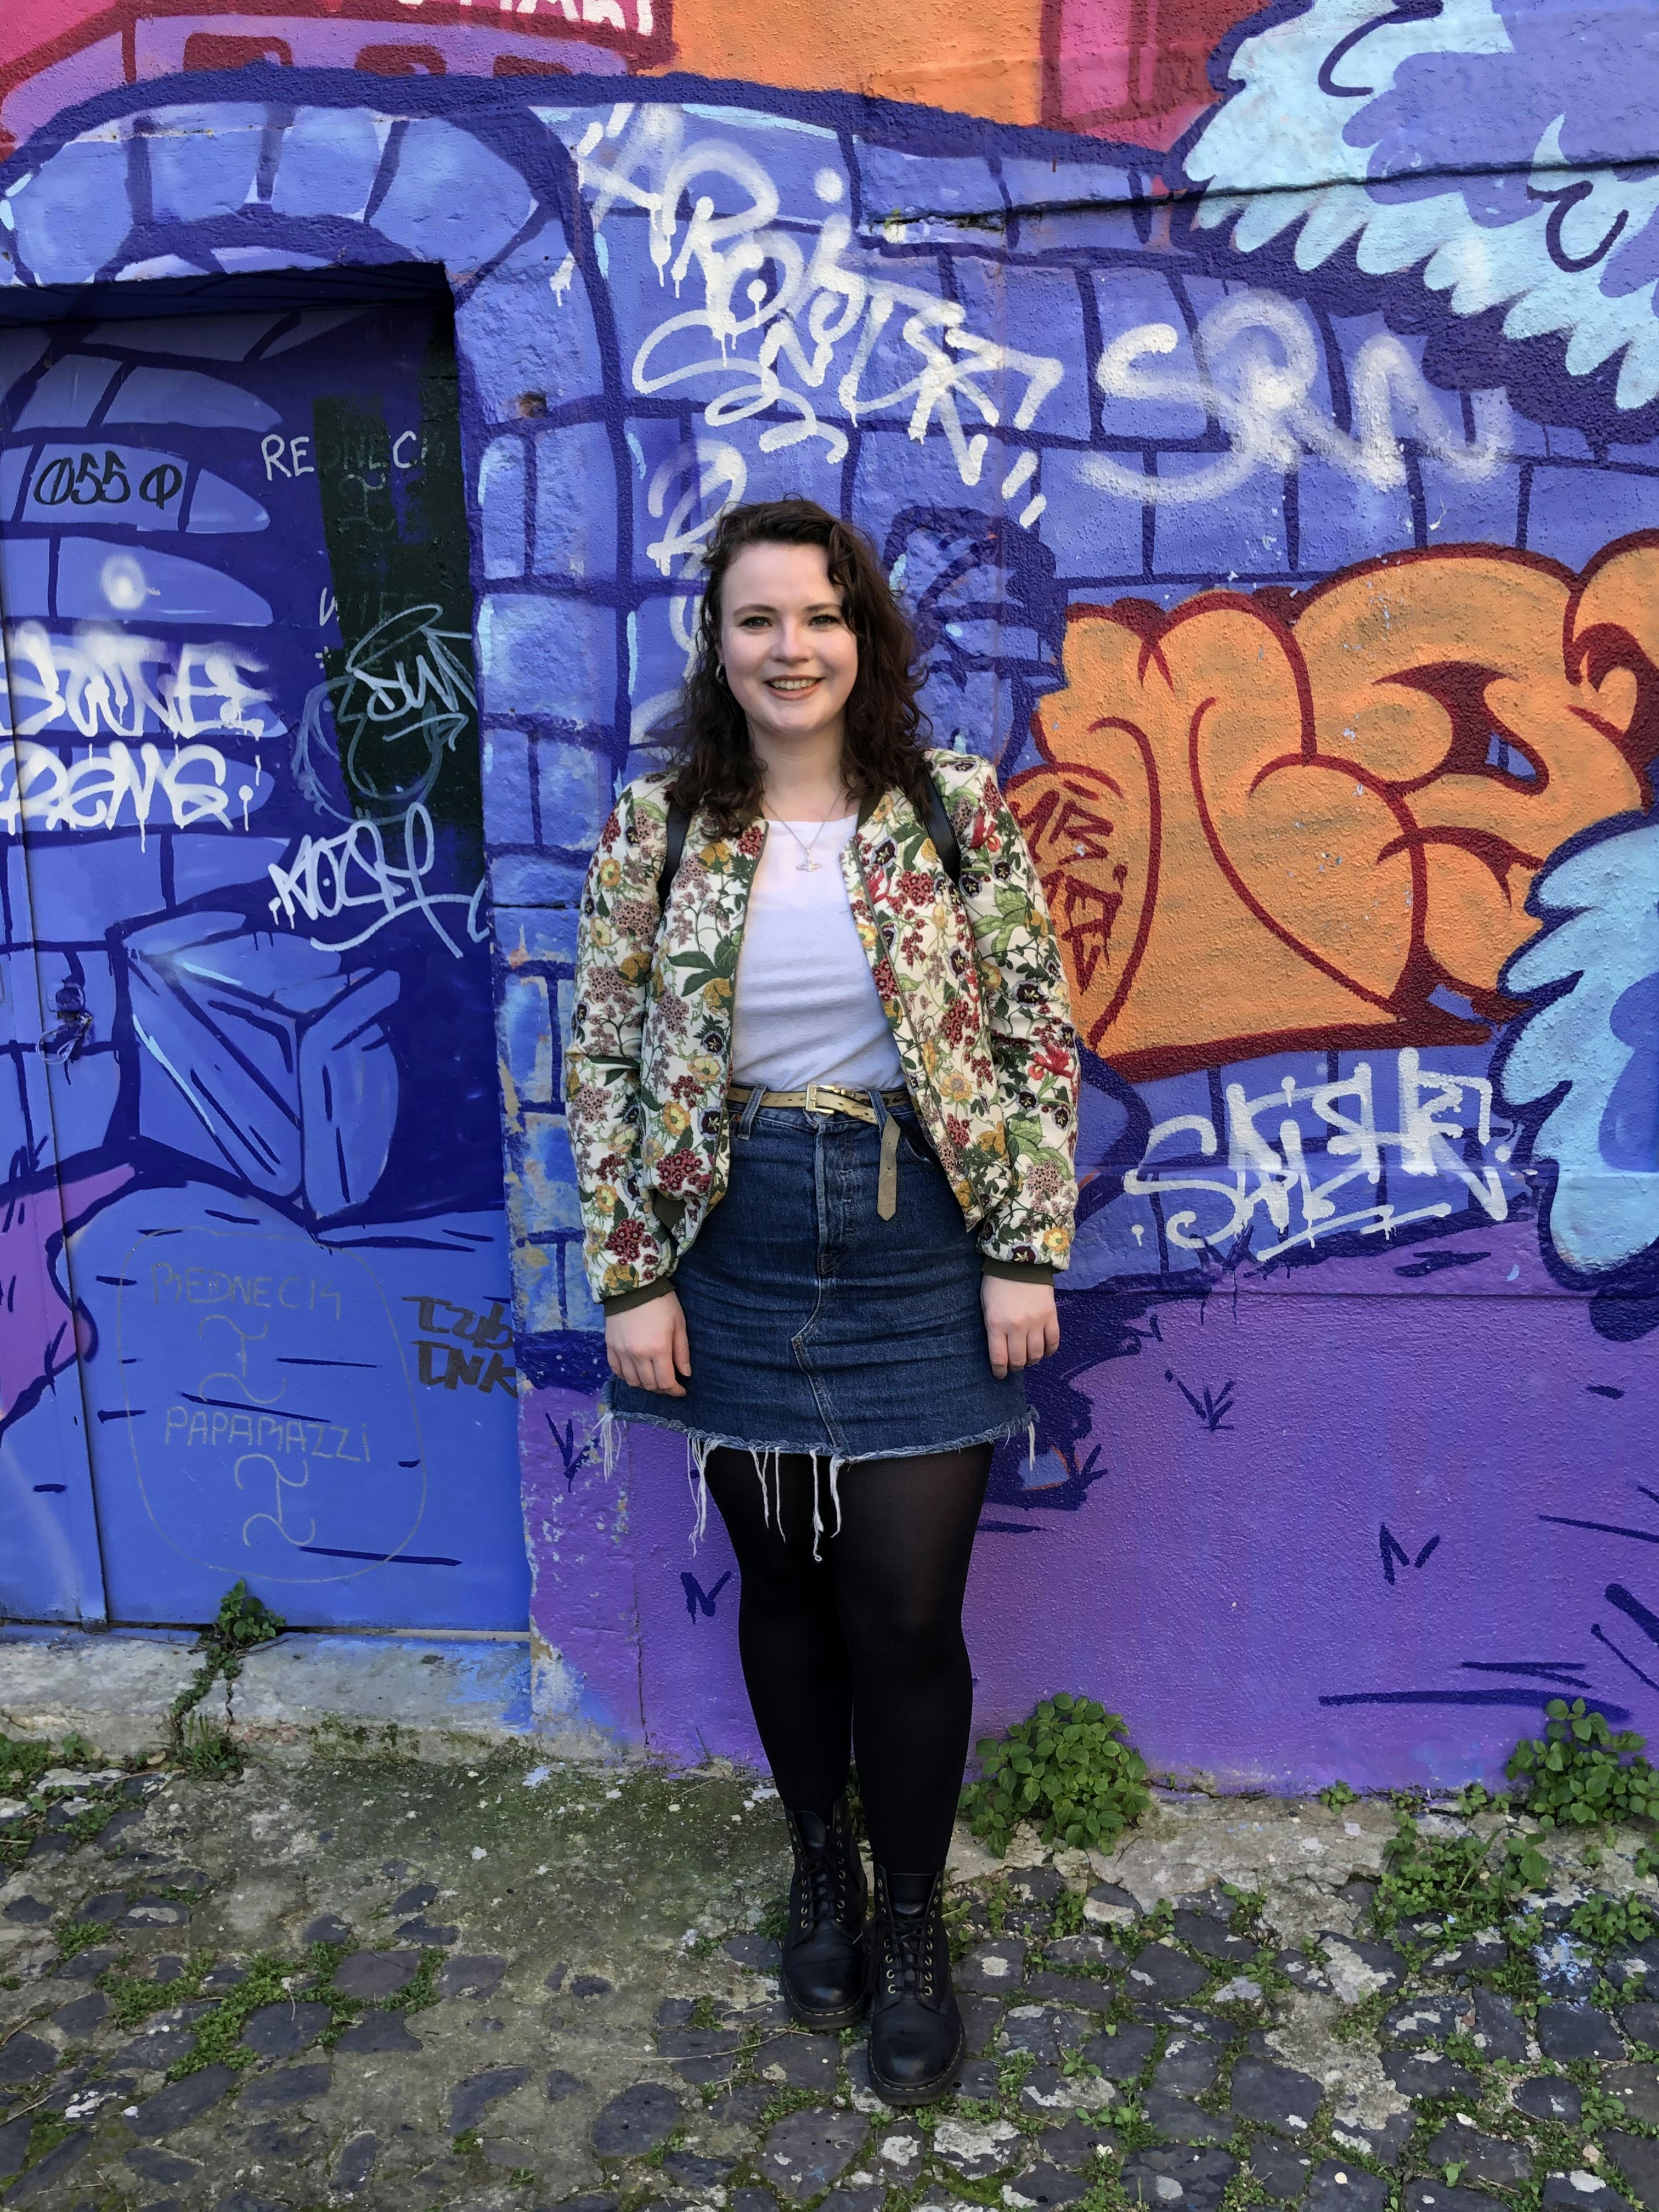 Writer Hope Brotherton poses in front of a blue wall with graffiti on it